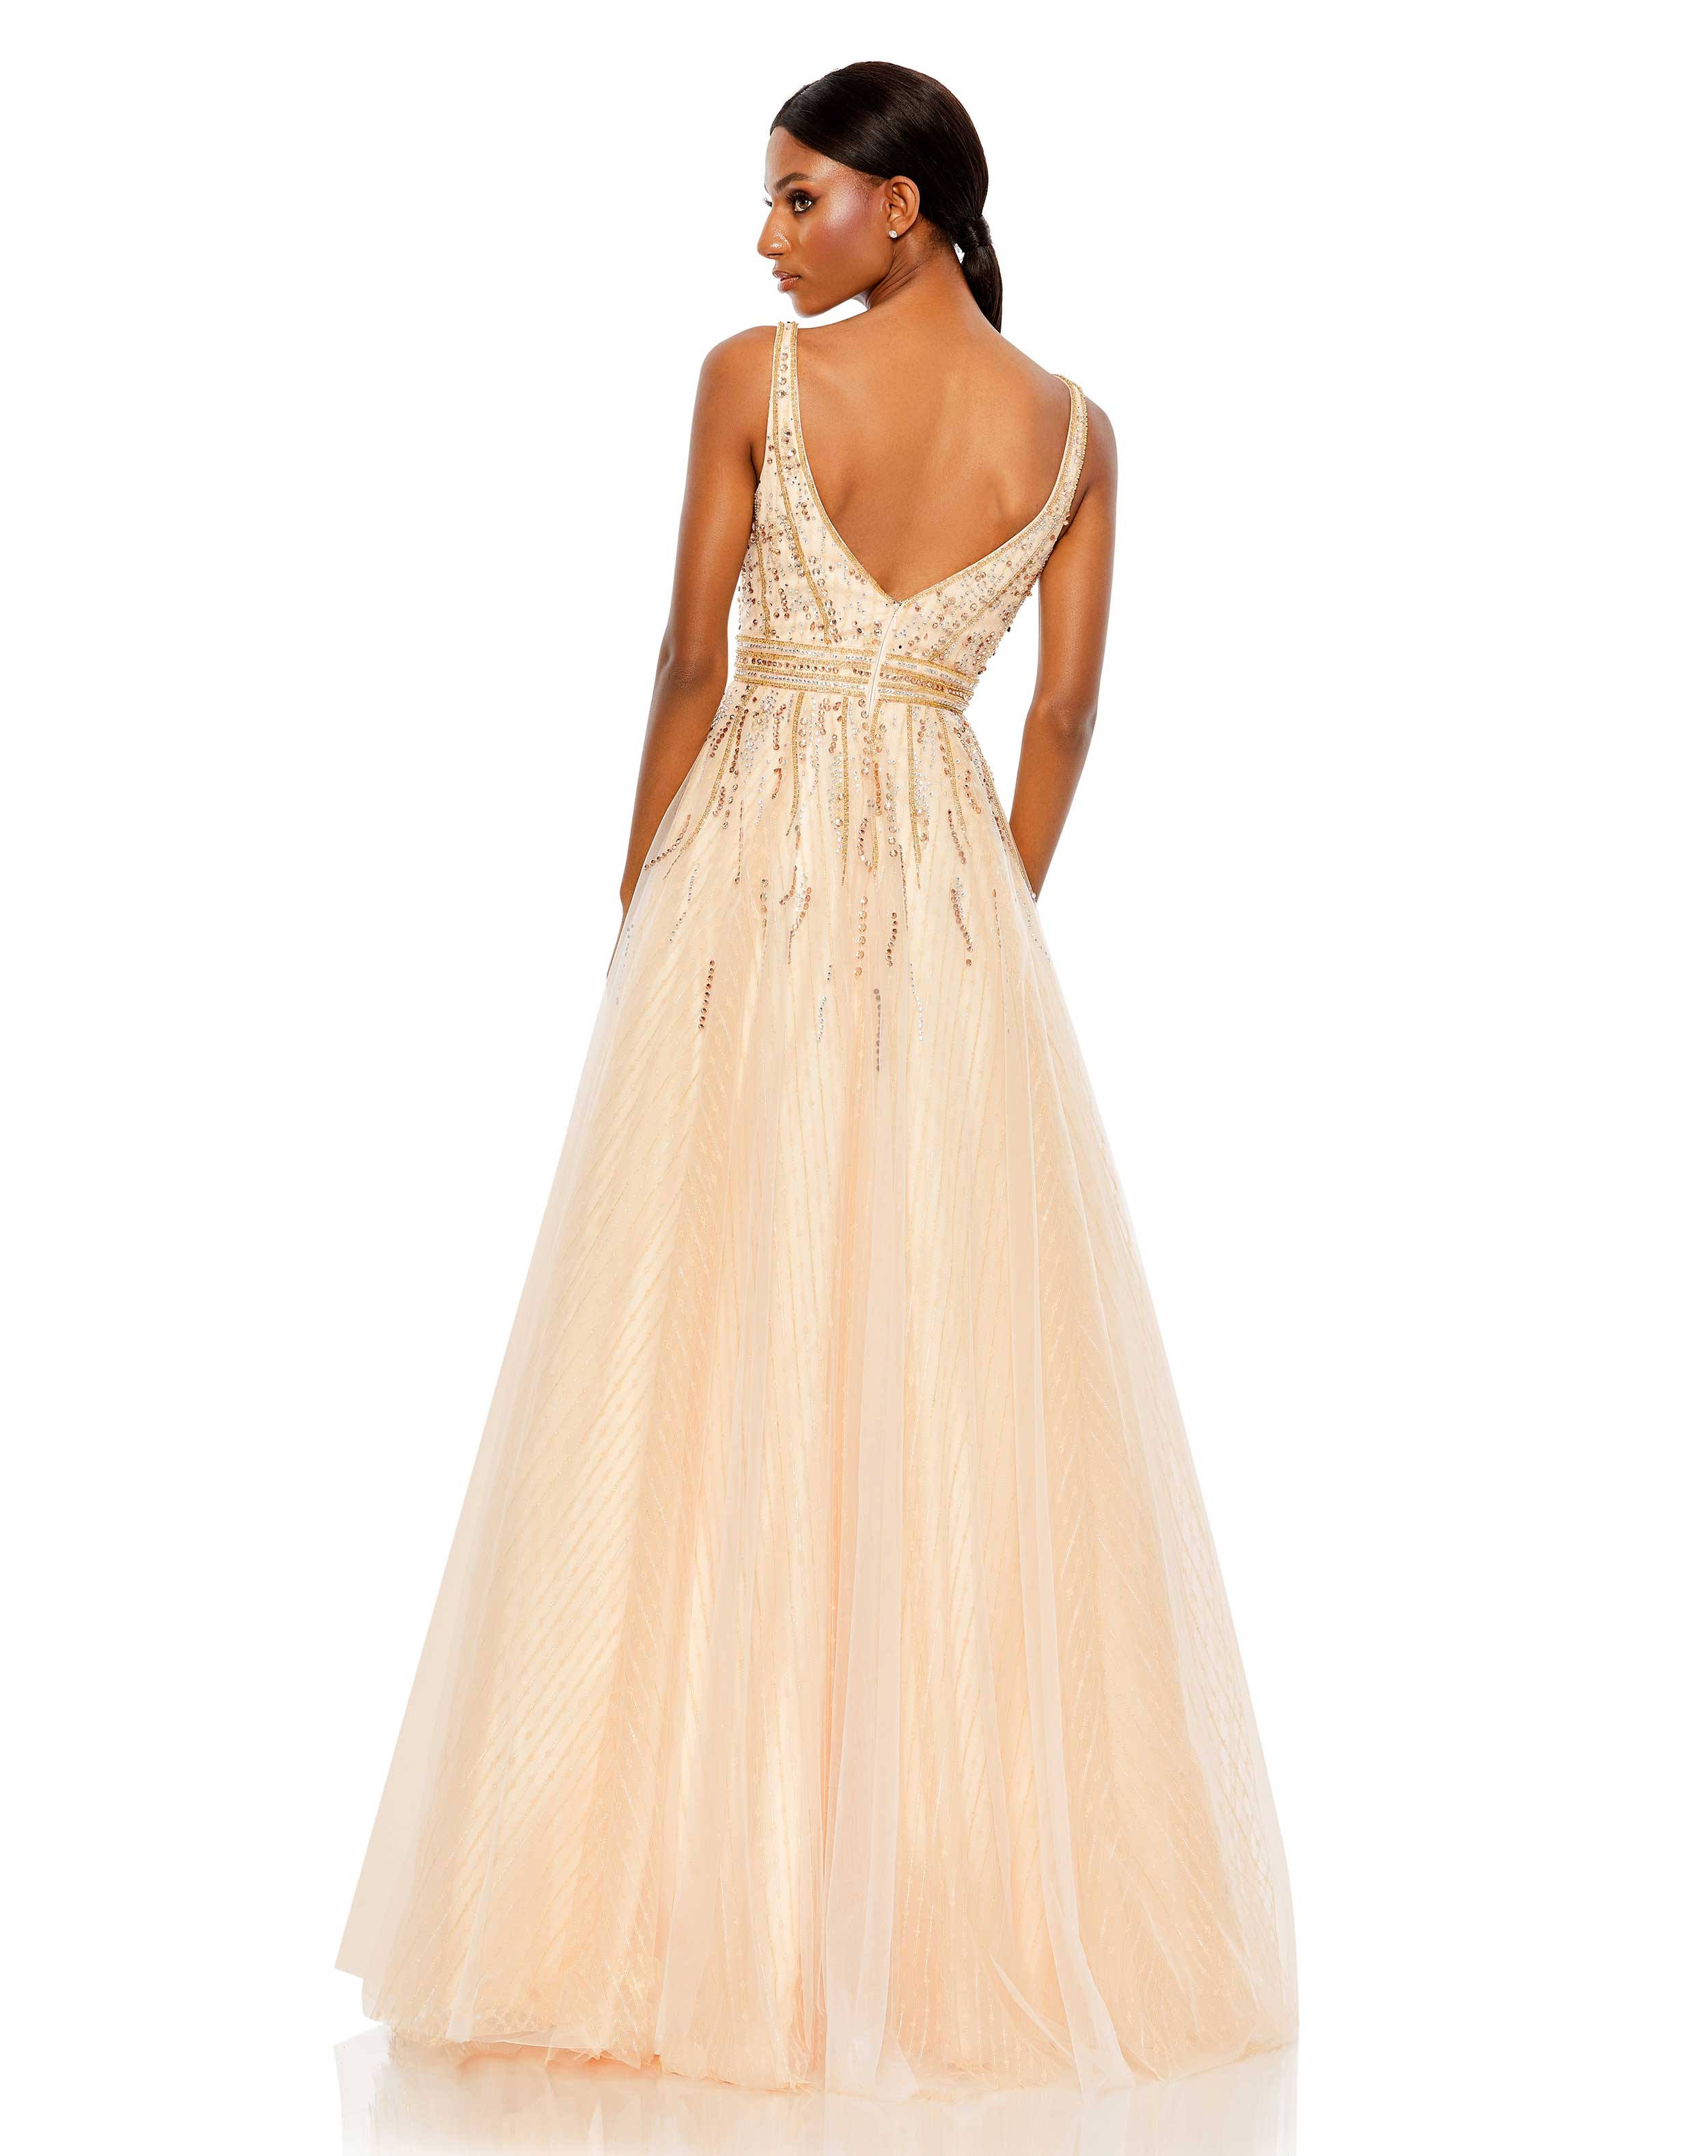 Jewel Encrusted Tulle Ball Gown - FINAL SALE